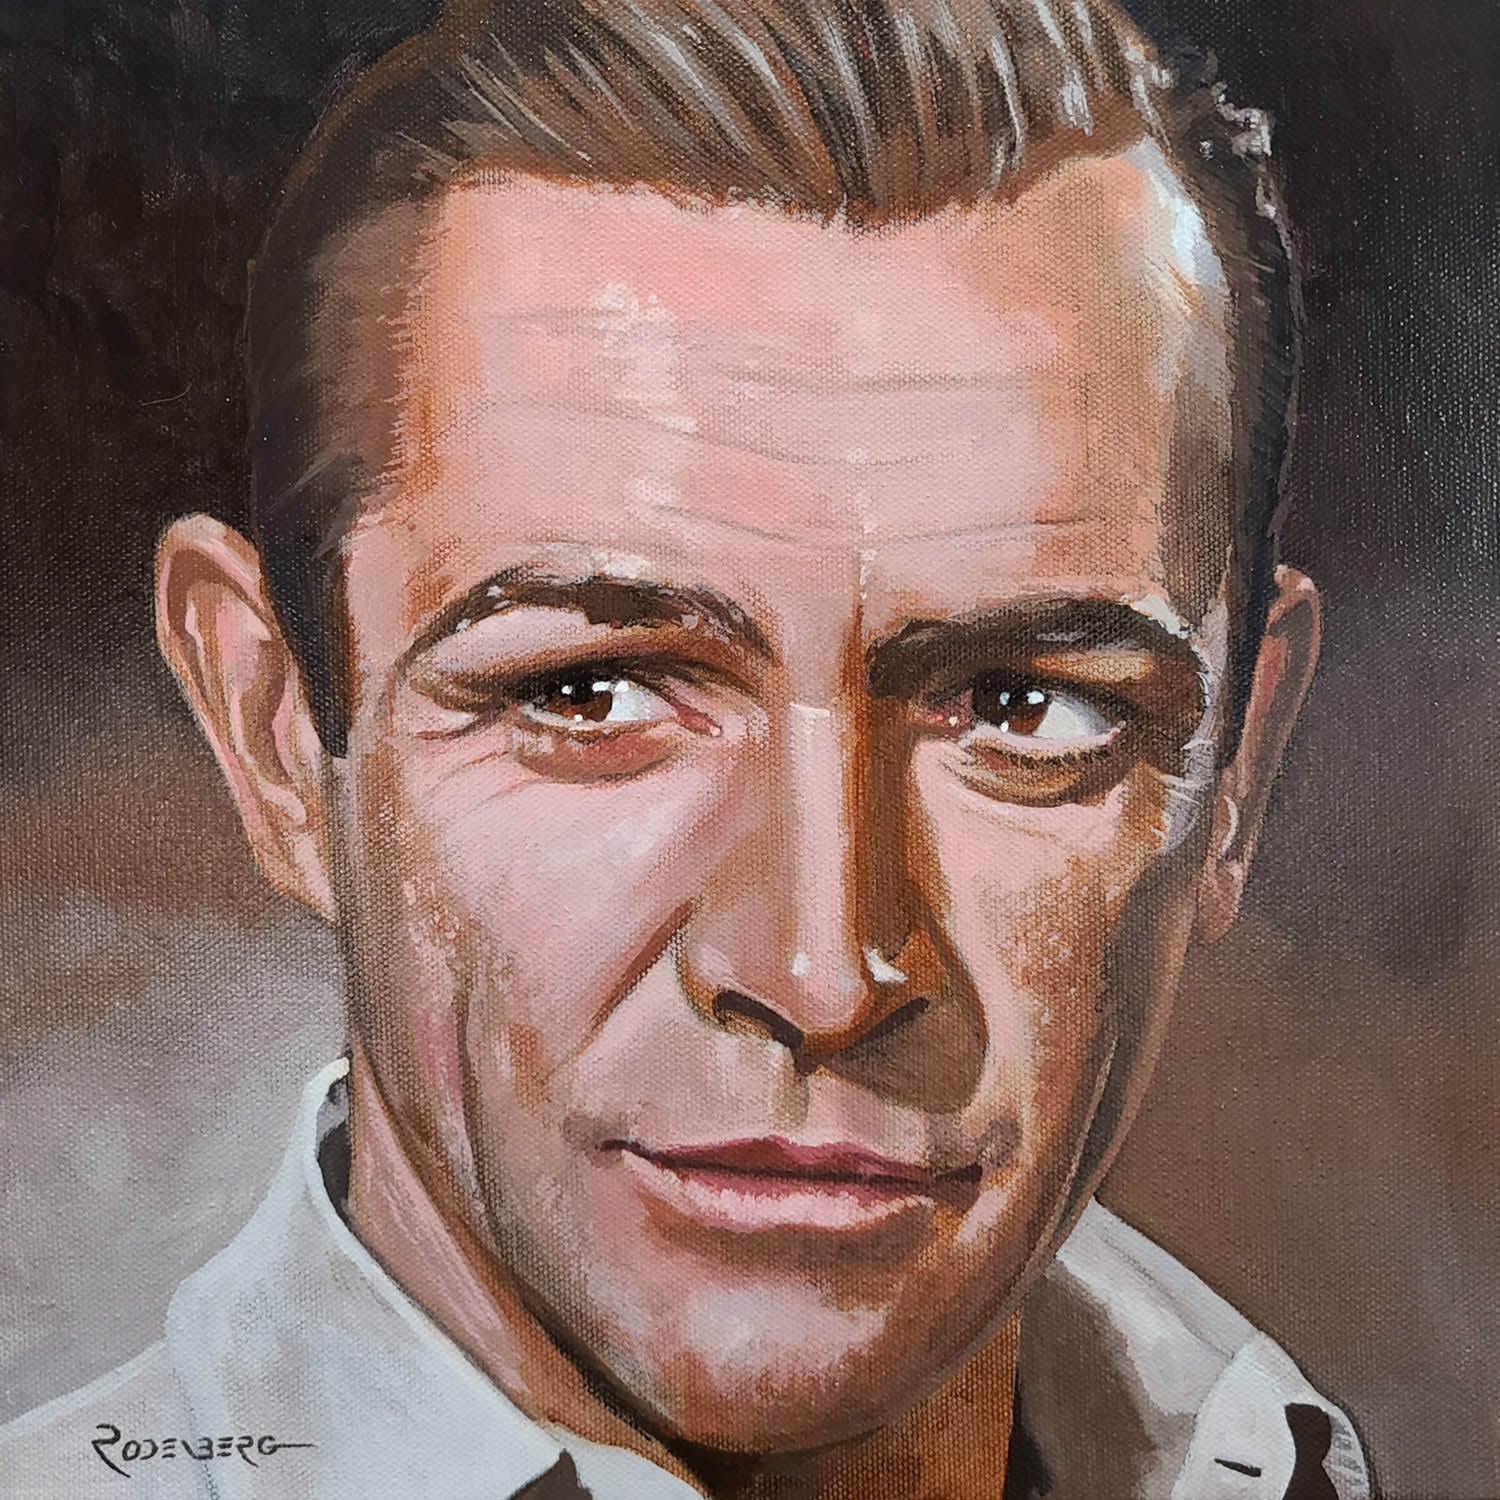 Sean Connery portrait painting art by Jeff Rodenberg